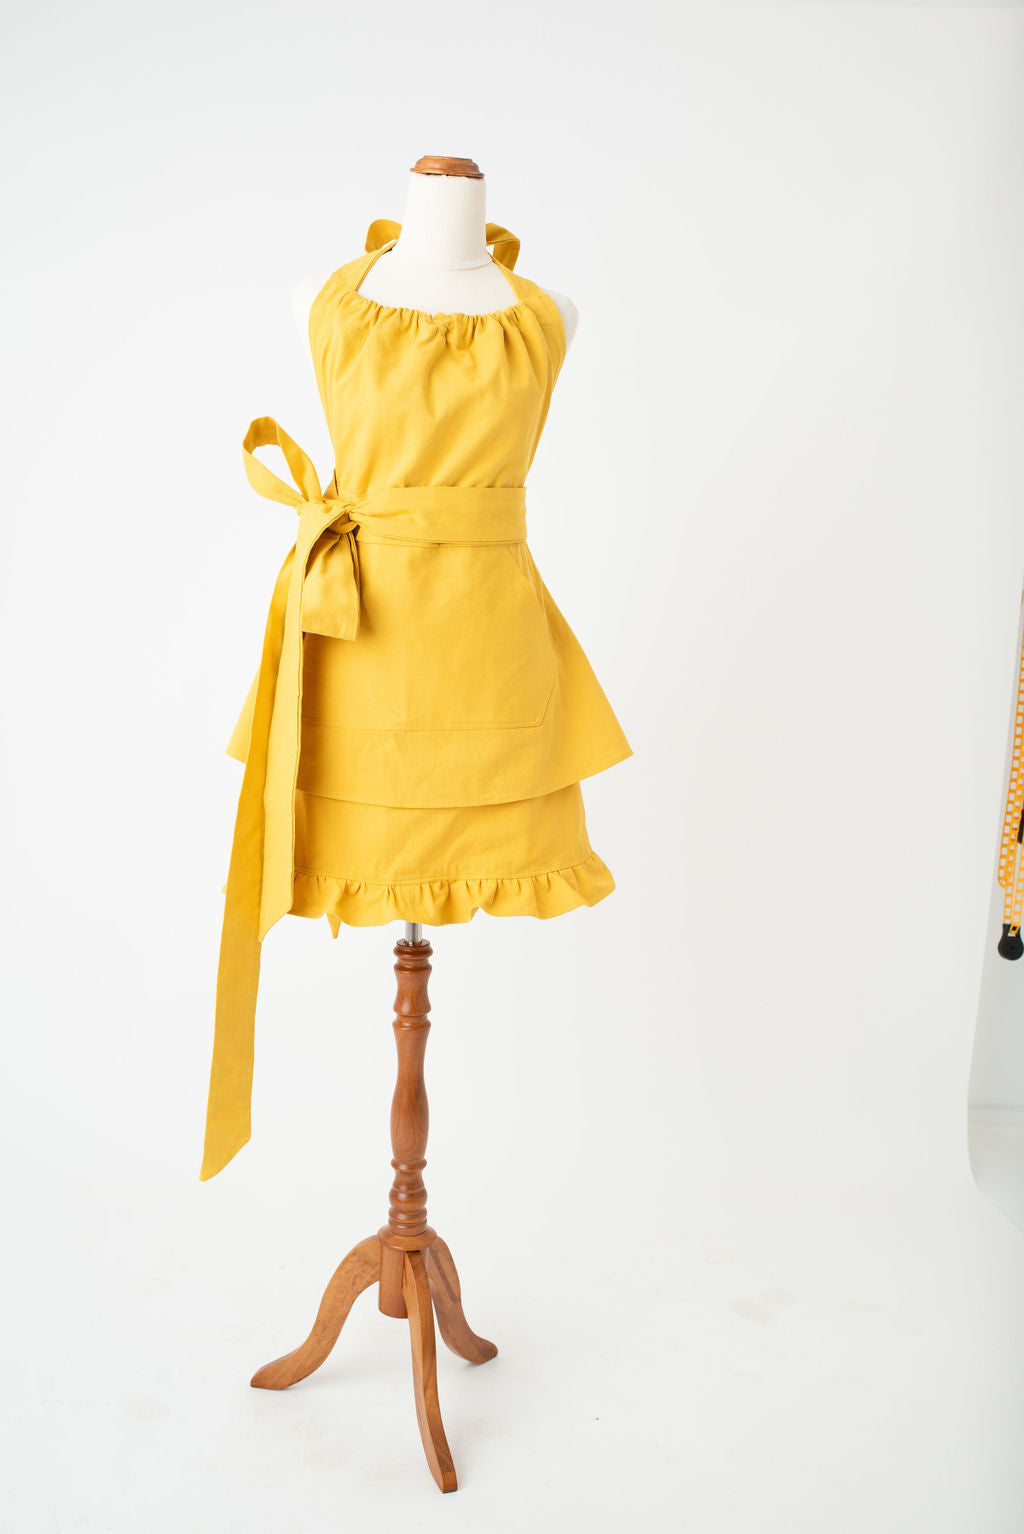 High waist feminine hostess apron in yellow by Pretty Made - Front bow